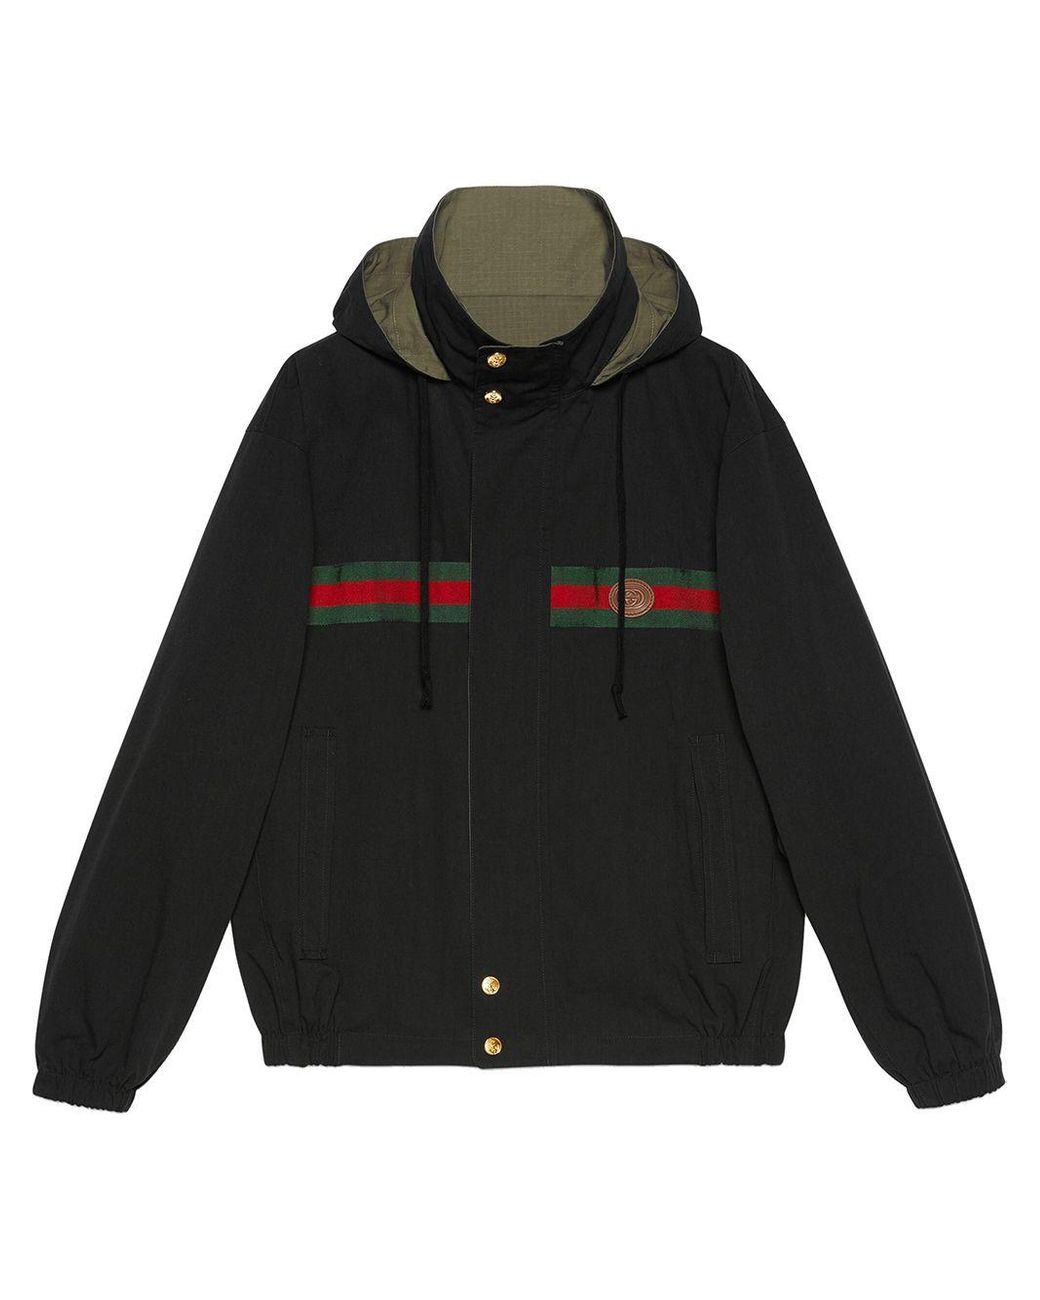 Gucci Cotton Reversible Zip-up Jacket in Black for Men - Lyst